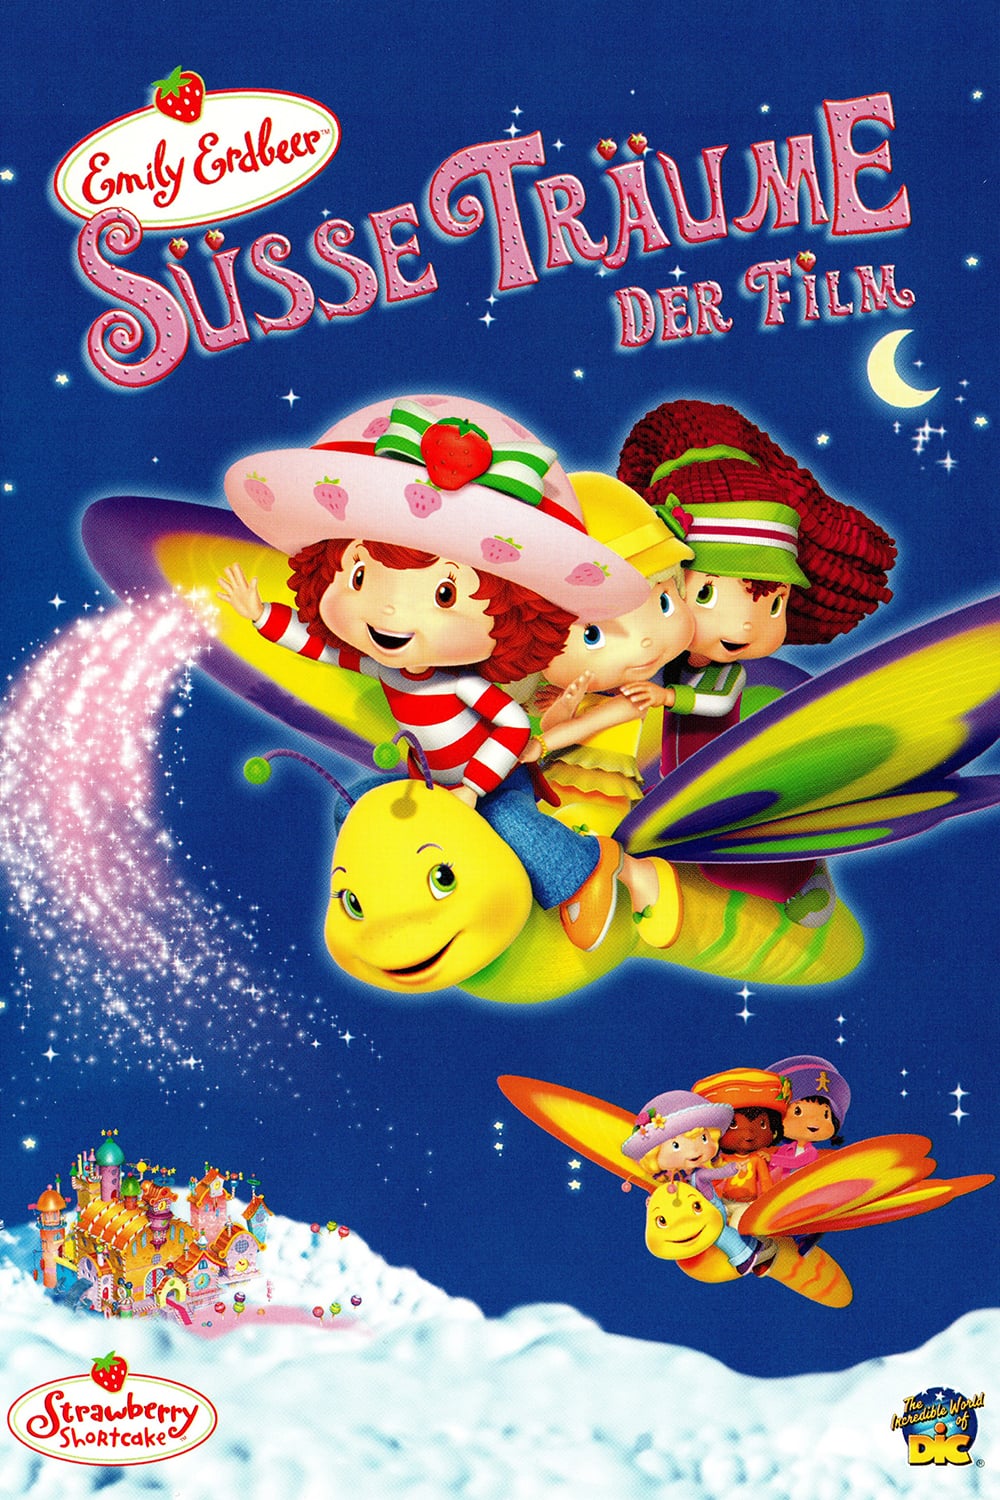 Strawberry Shortcake: The Sweet Dreams Movie – PG13 Guide